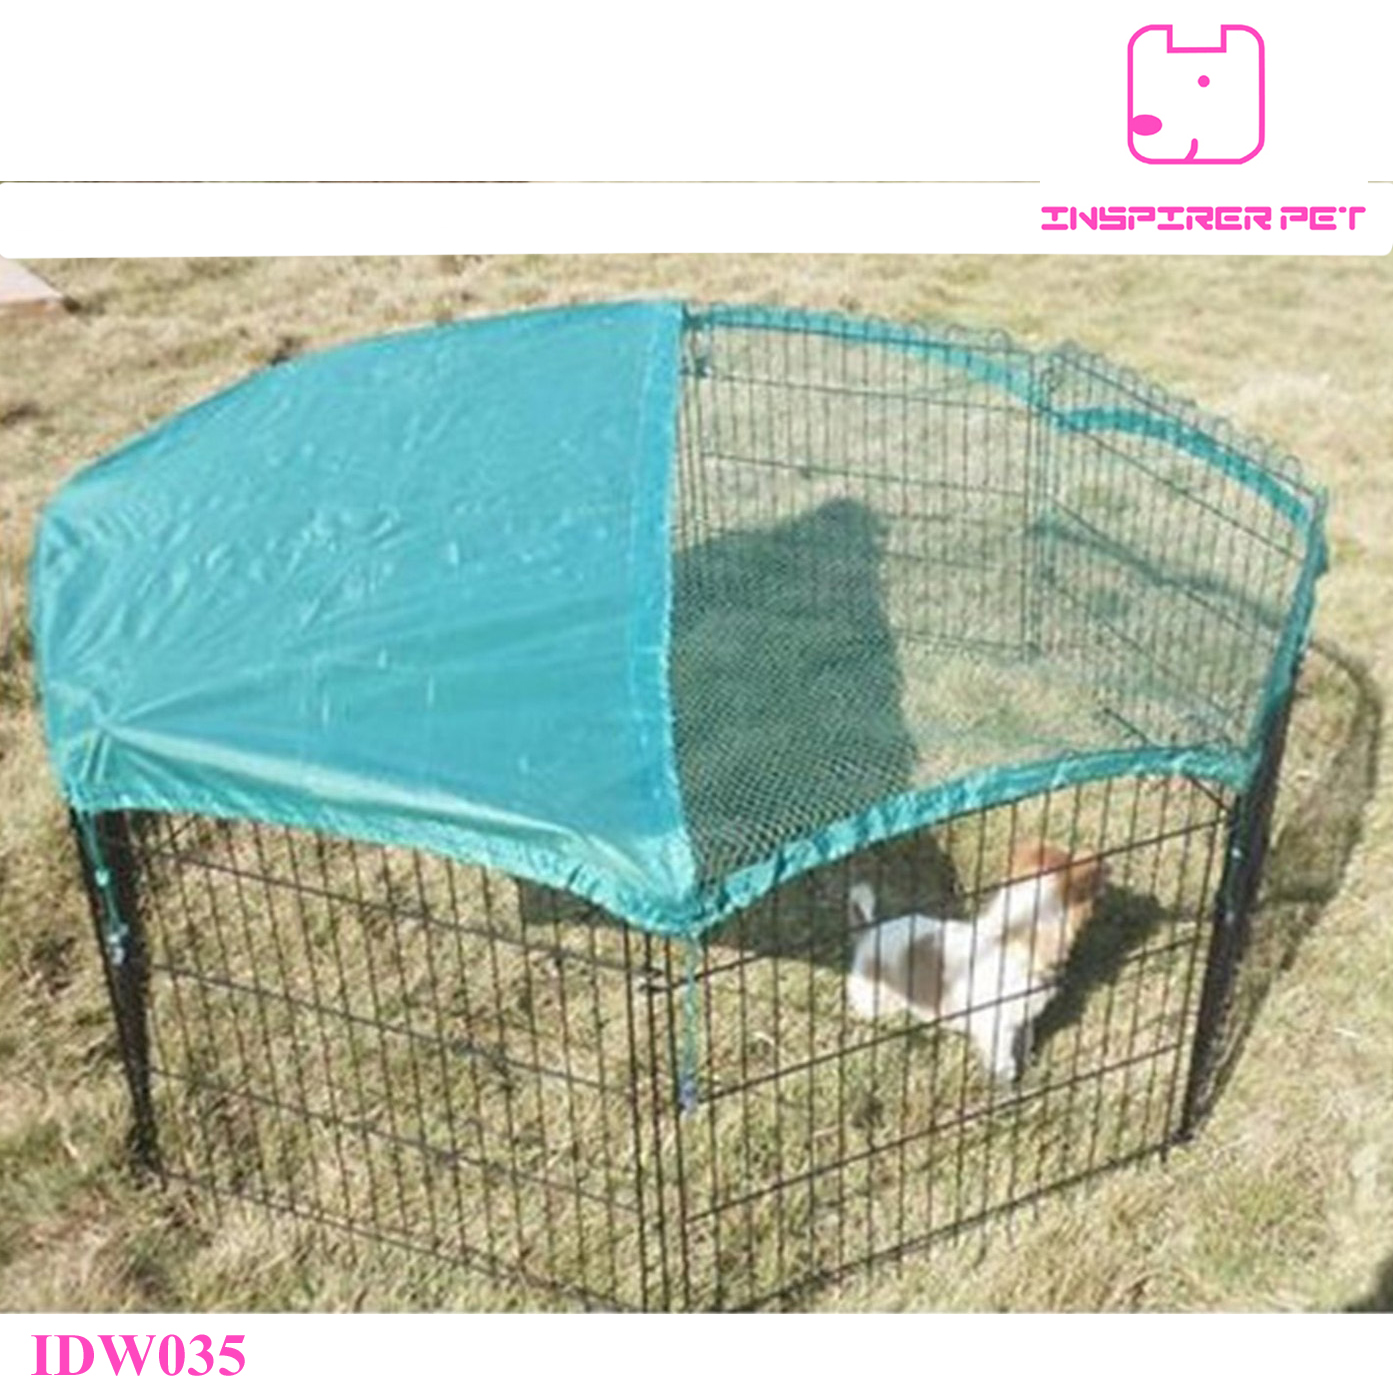 Dog Enclosure Pet Metal Playpen with Cover